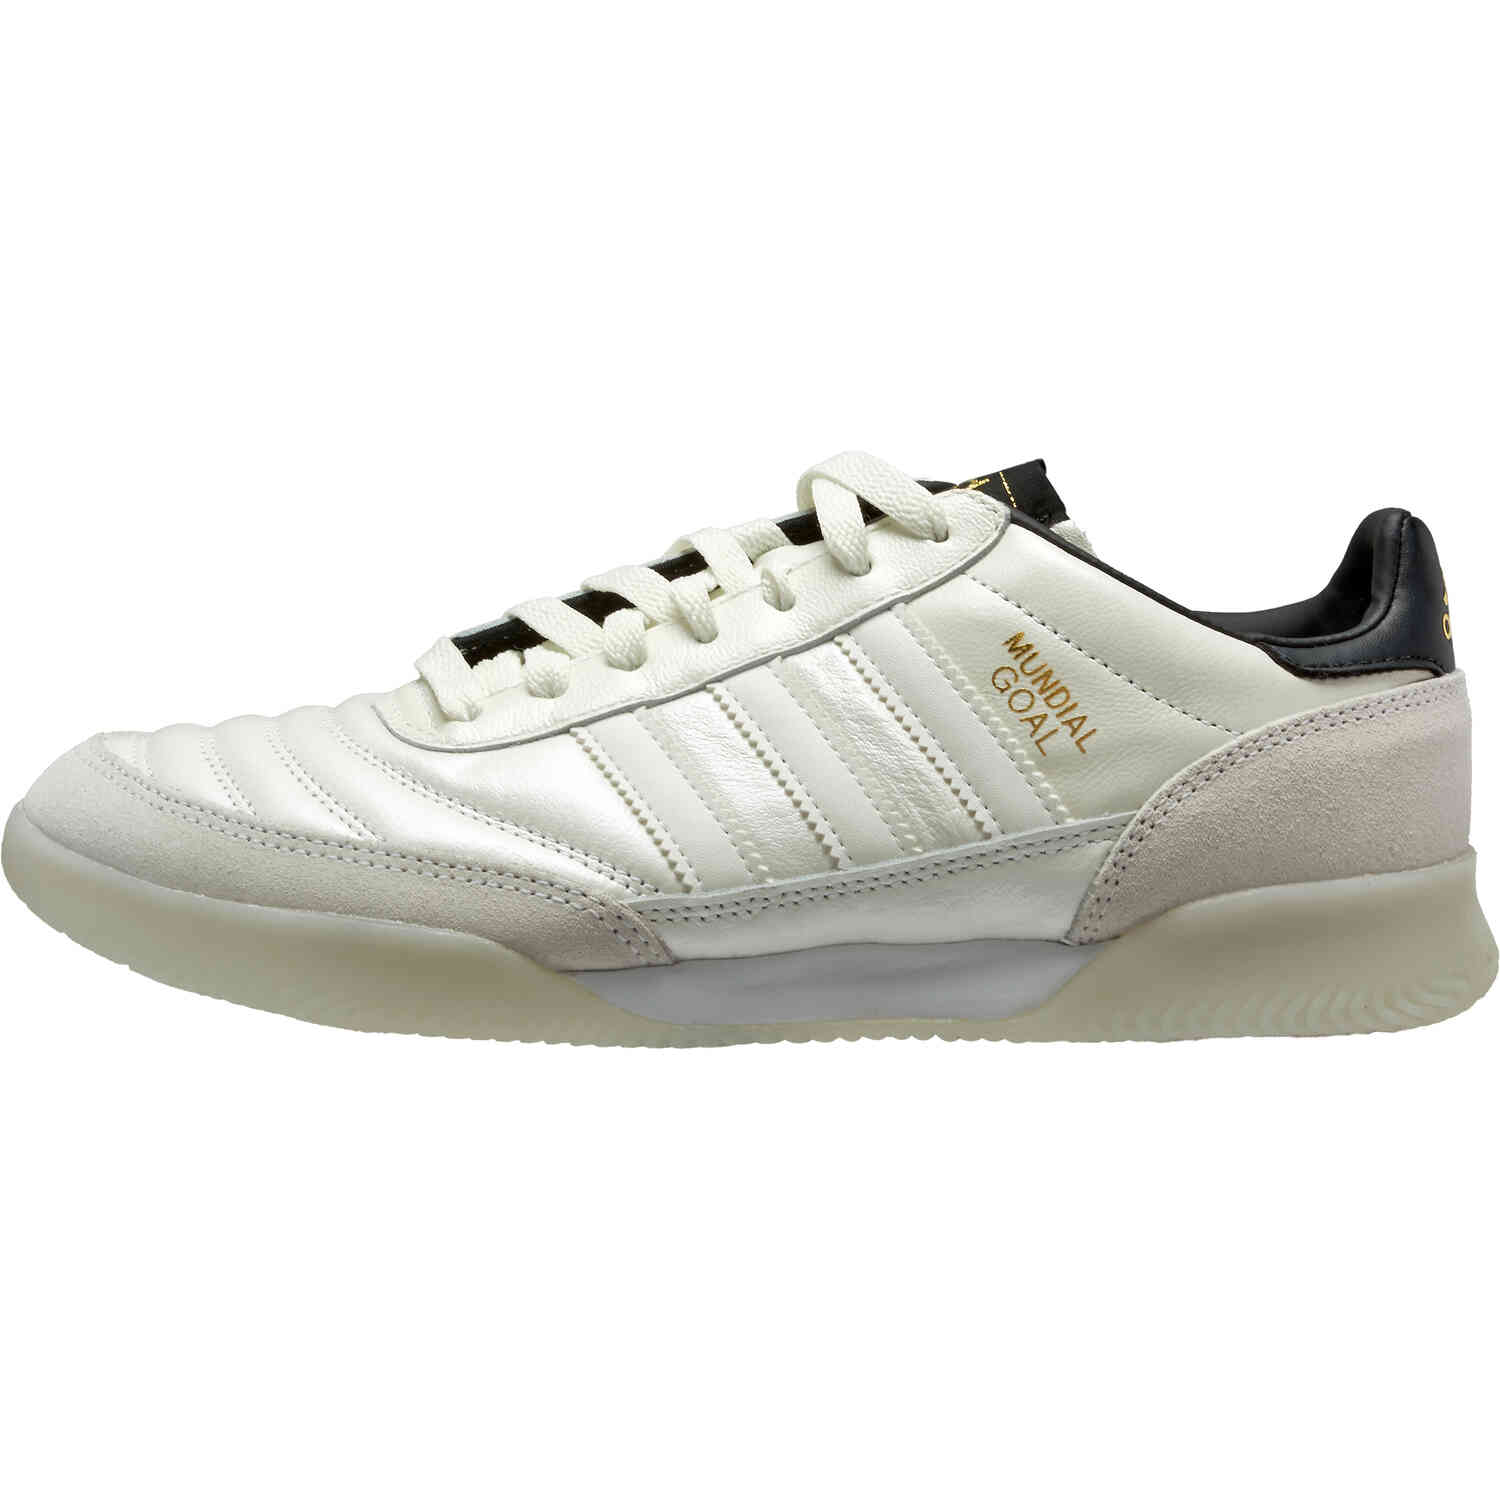 Belong their Ideally adidas Mundial Goal 20 TR - Core White & Core White with Gold Metallic -  Soccer Master